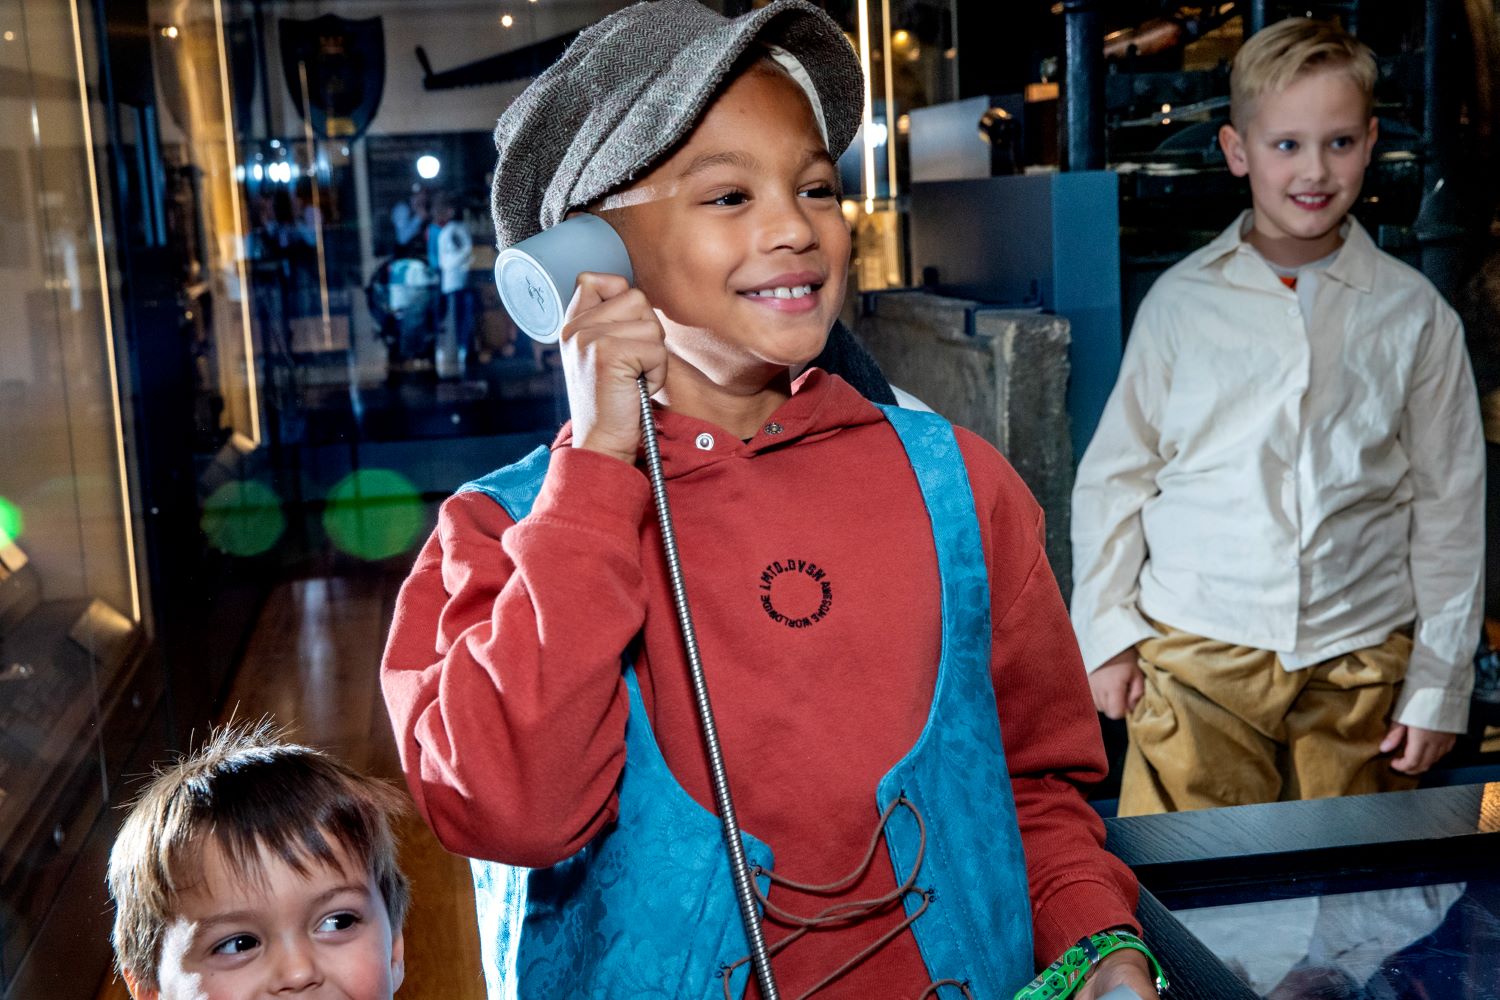 A young child wearing a flat cap and blue waistcoat on top of his clothes holds a speaker up to his ear and grins at Craven Museum.